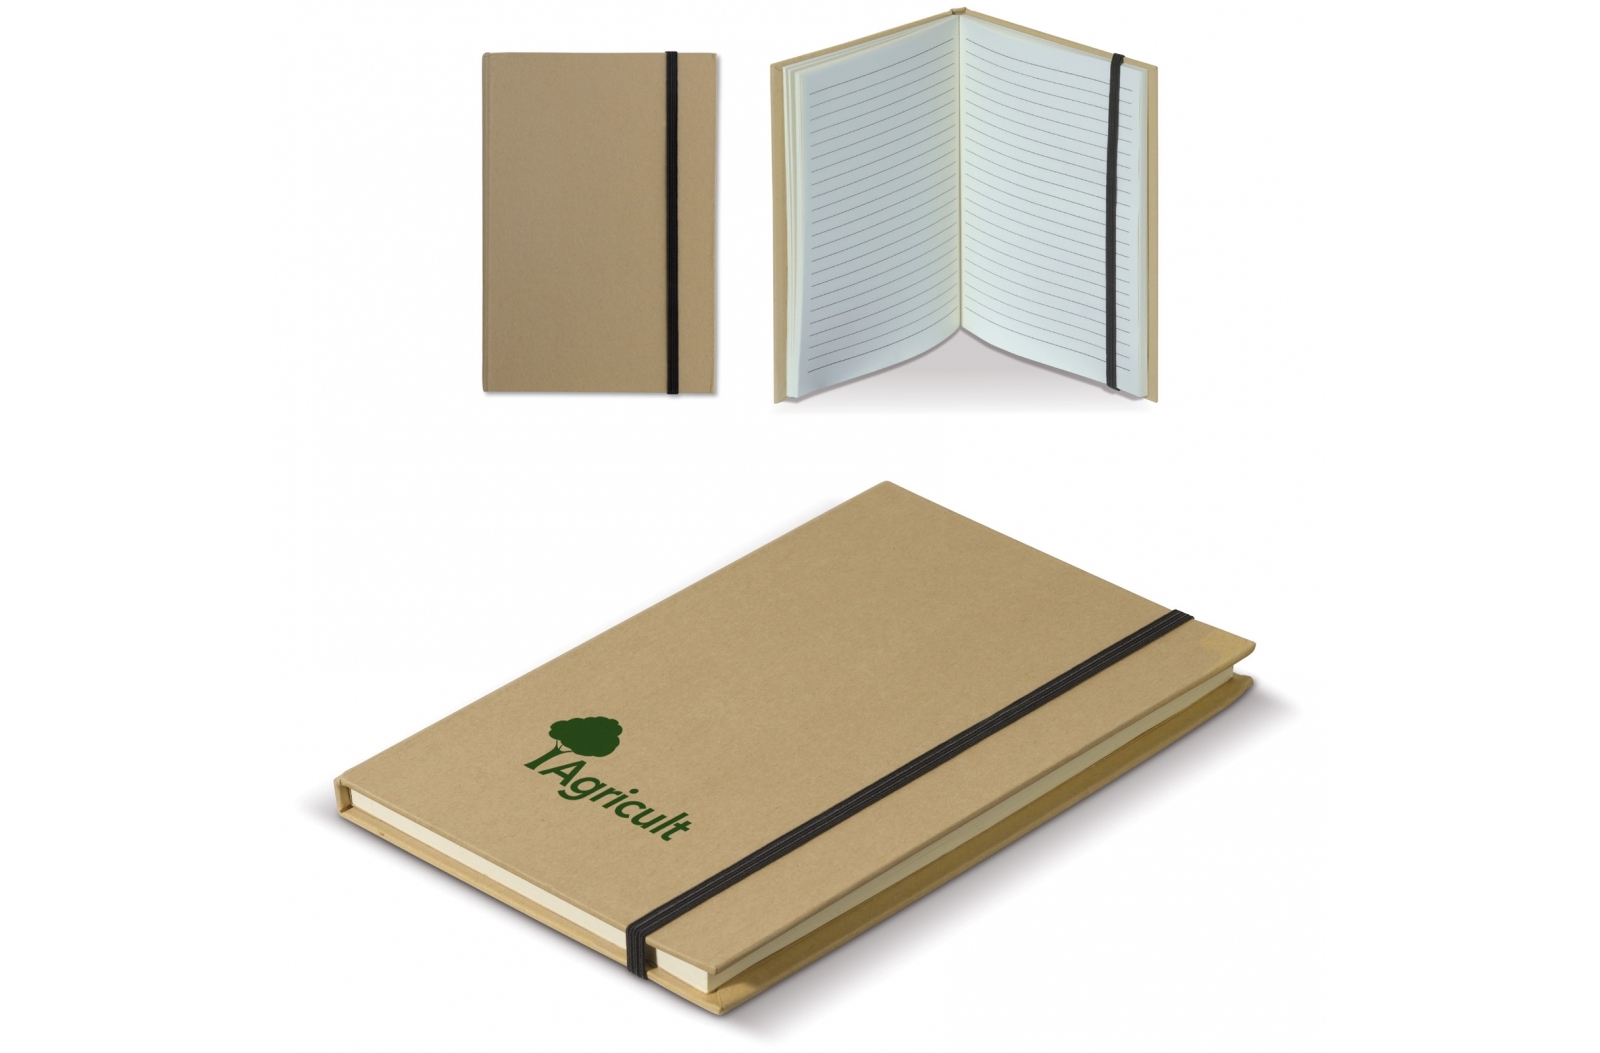 A5 Size Notebook with Elastic Strap and Lined Pages - Bourne End